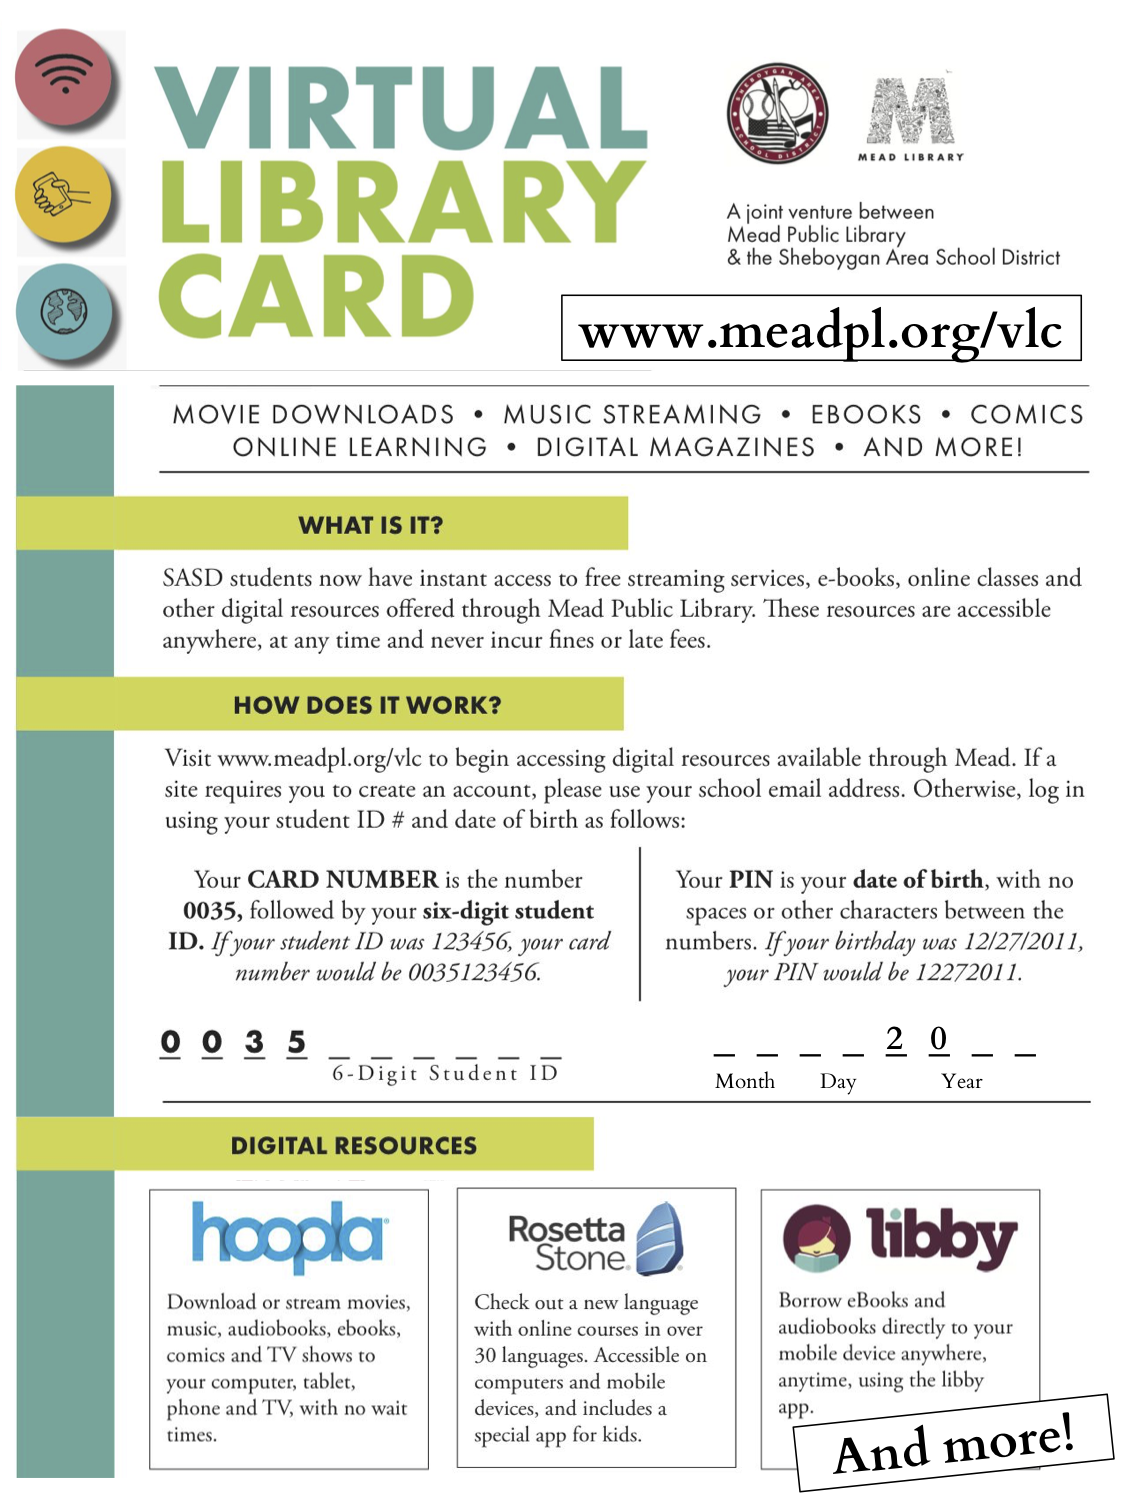 Virtual Library Card 1 page flyer